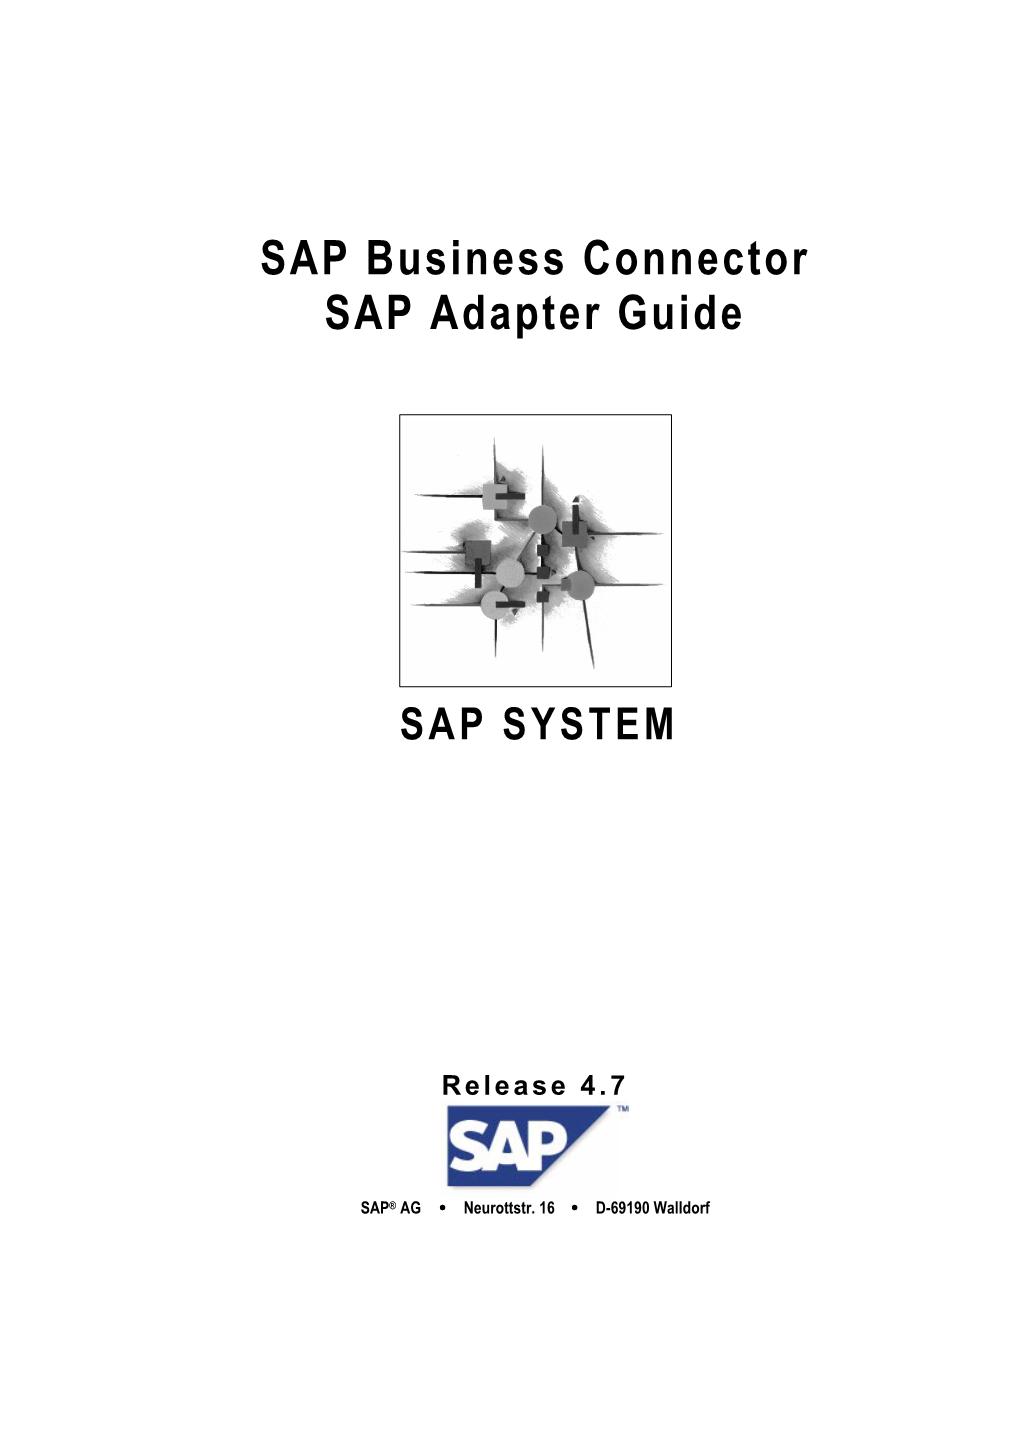 SAP Business Connector SAP Adapter Guide